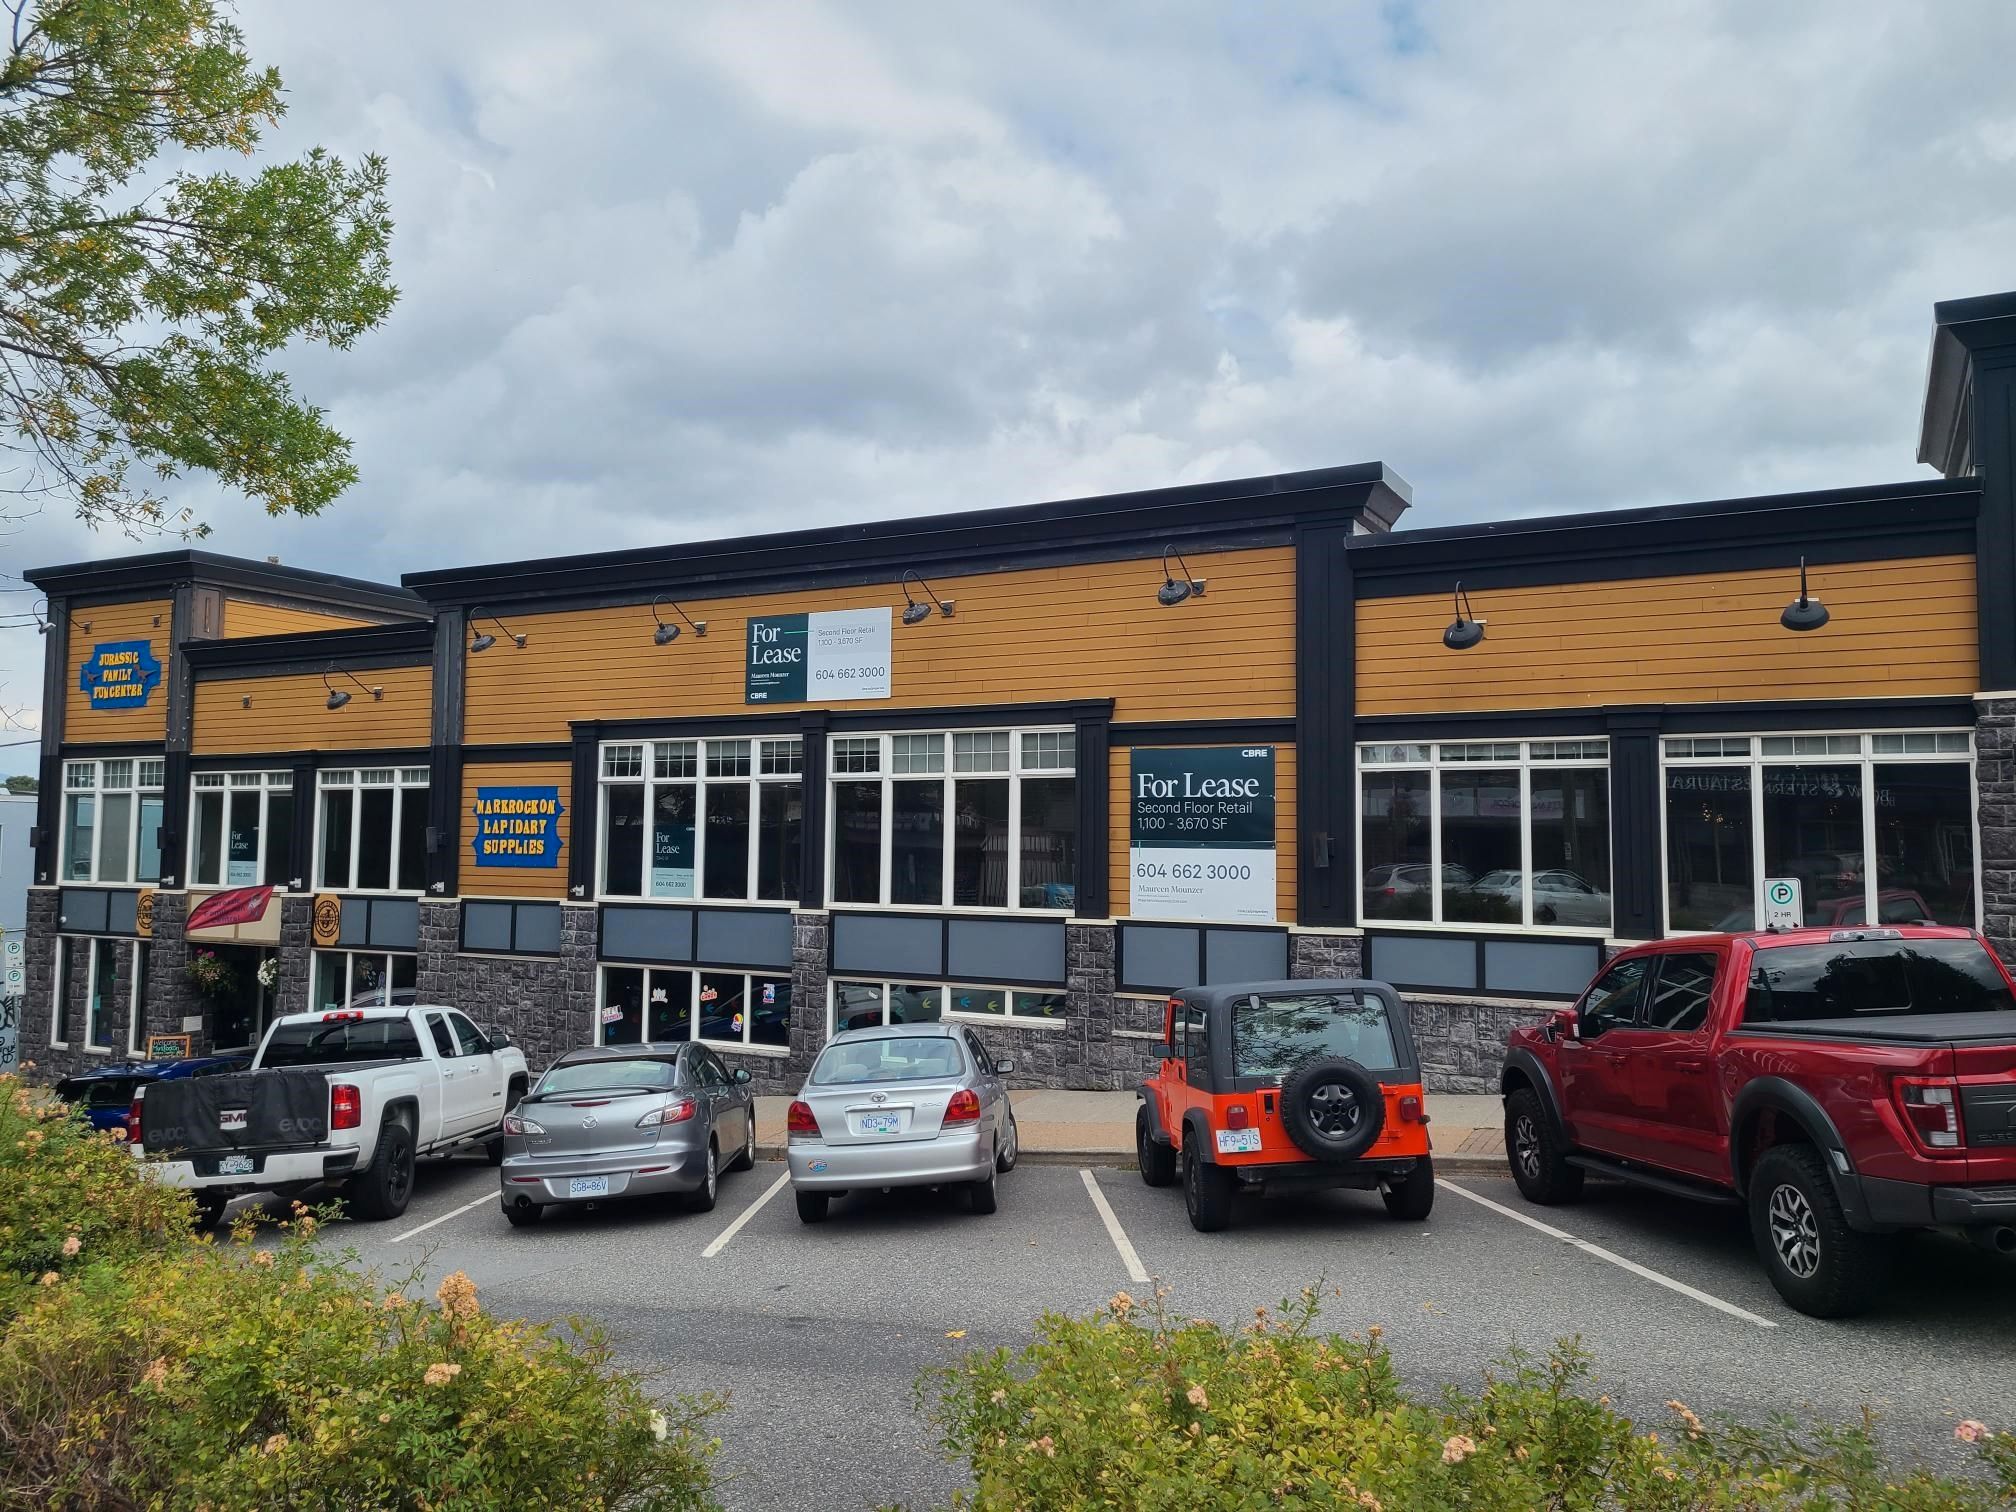 Main Photo: 204 2556 MONTROSE Avenue in Abbotsford: Central Abbotsford Office for lease : MLS®# C8056606